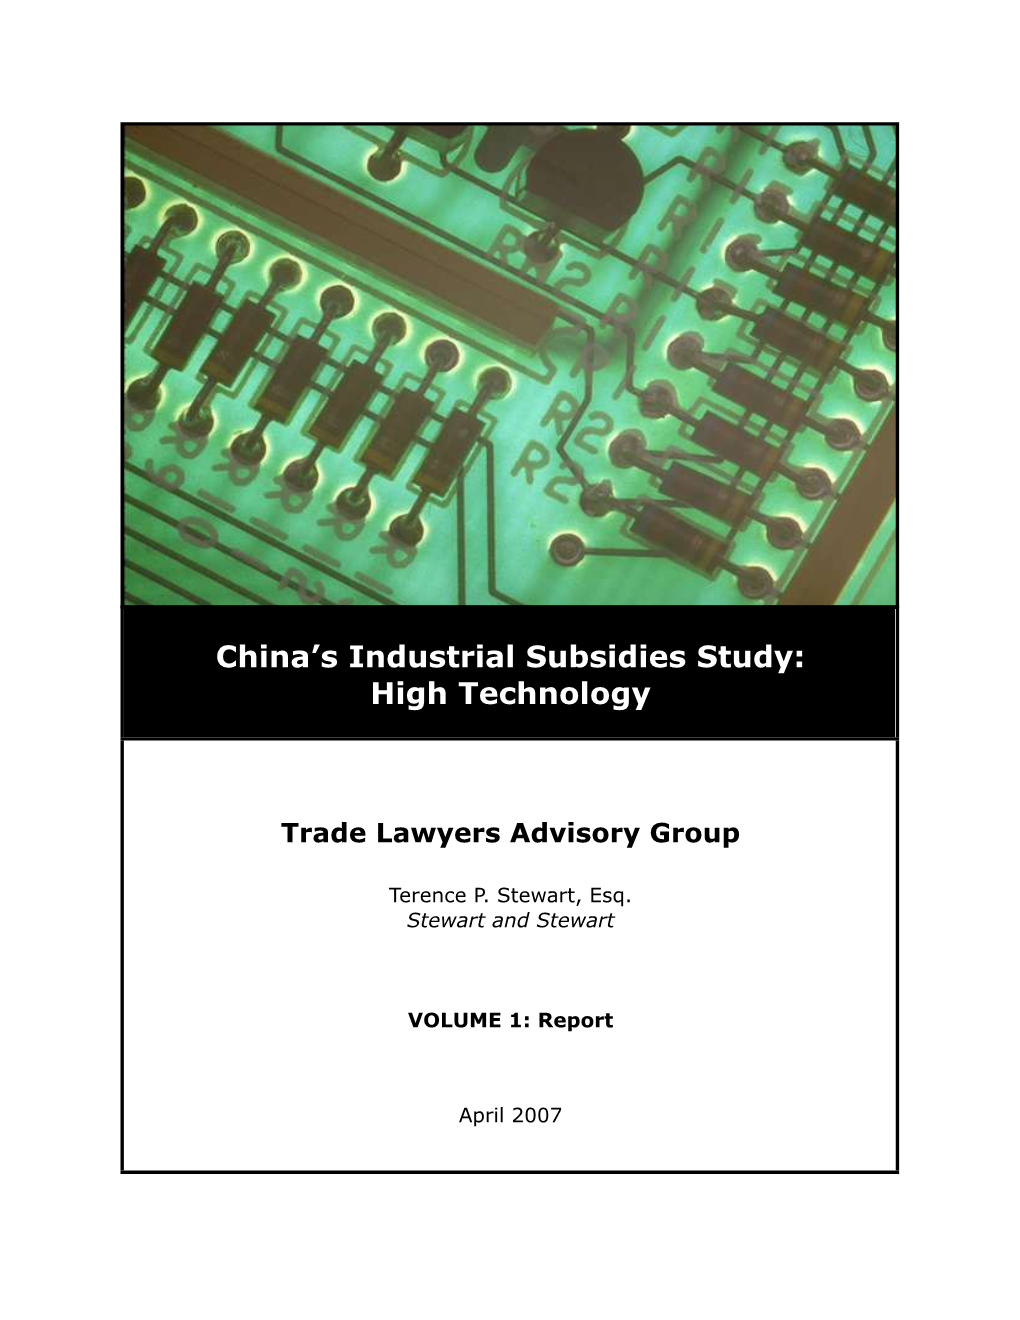 China's Industrial Subsidies Study: High Technology